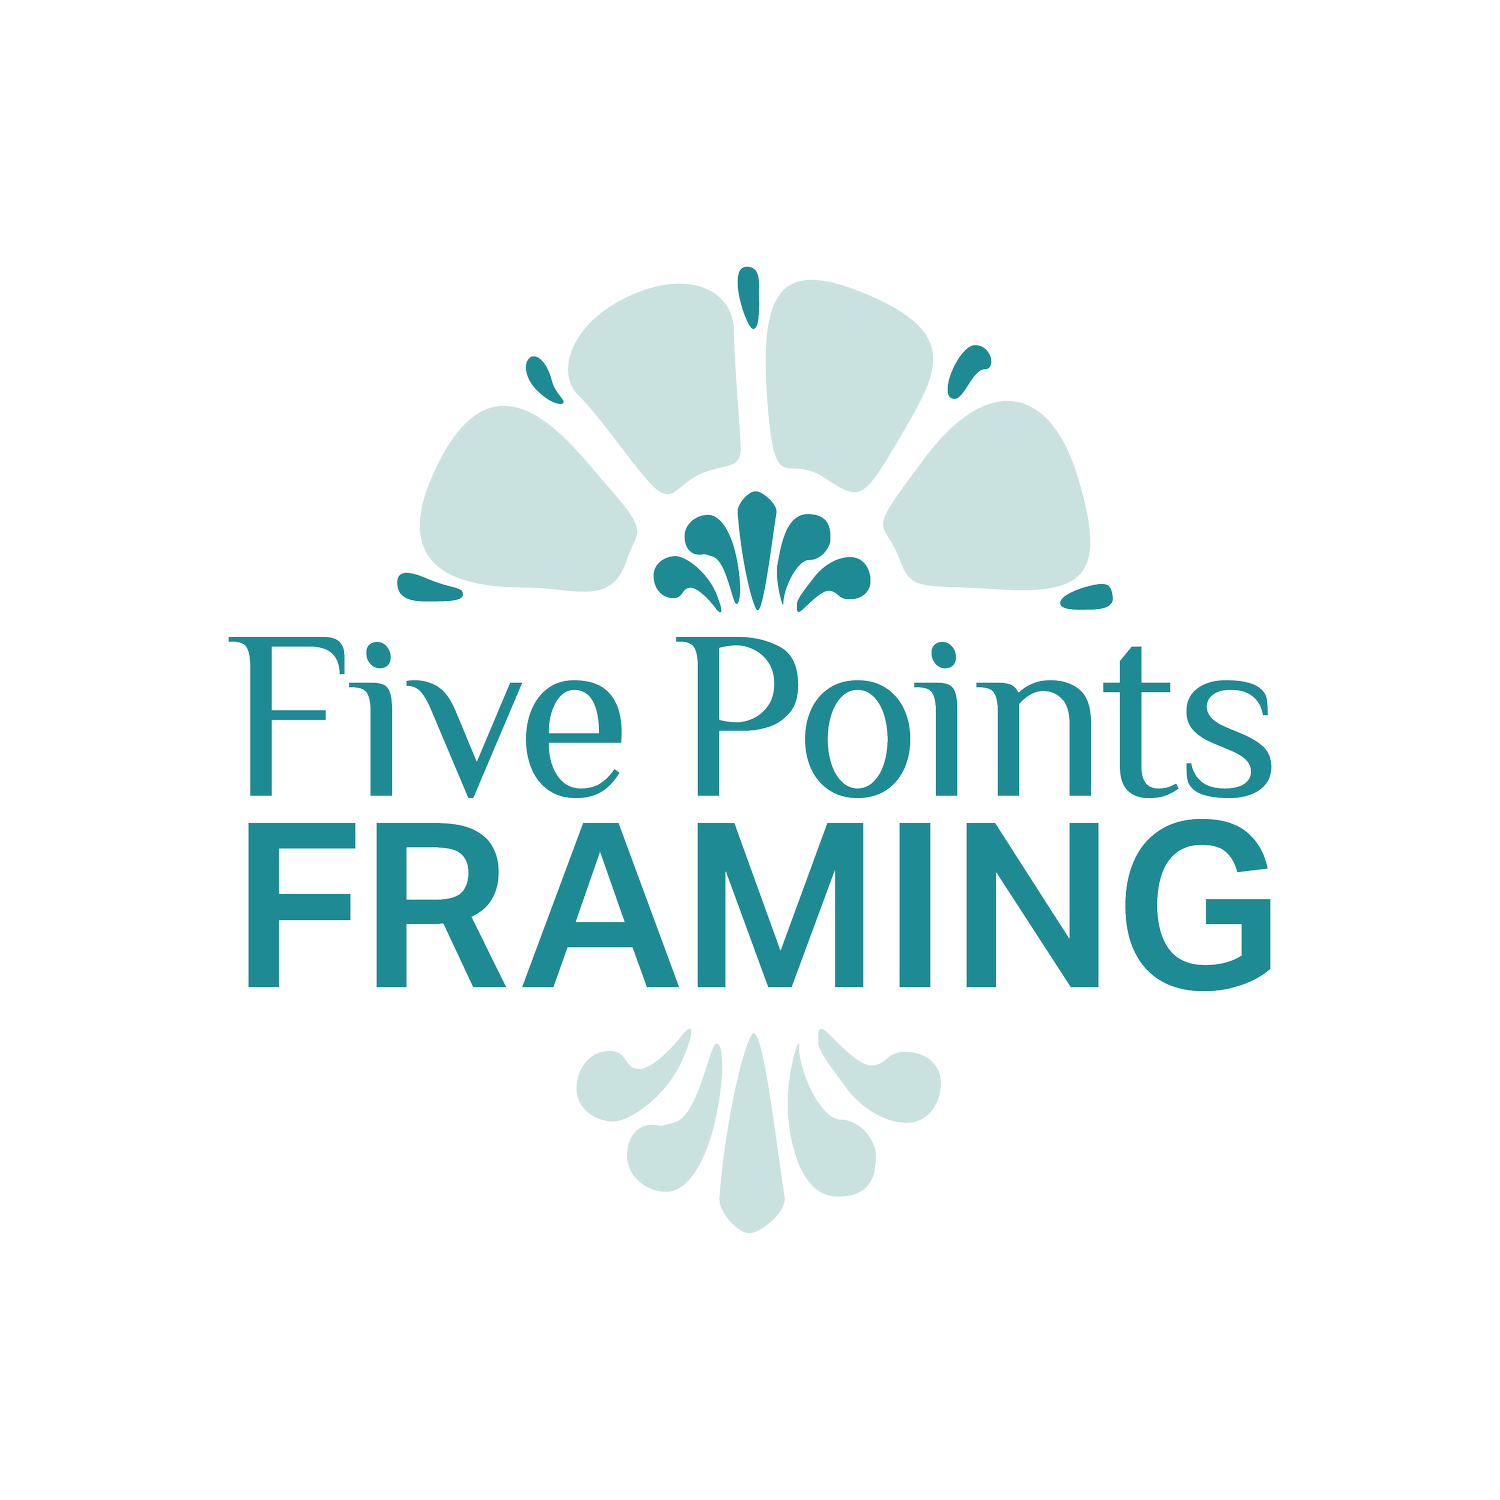 Five Points Framing